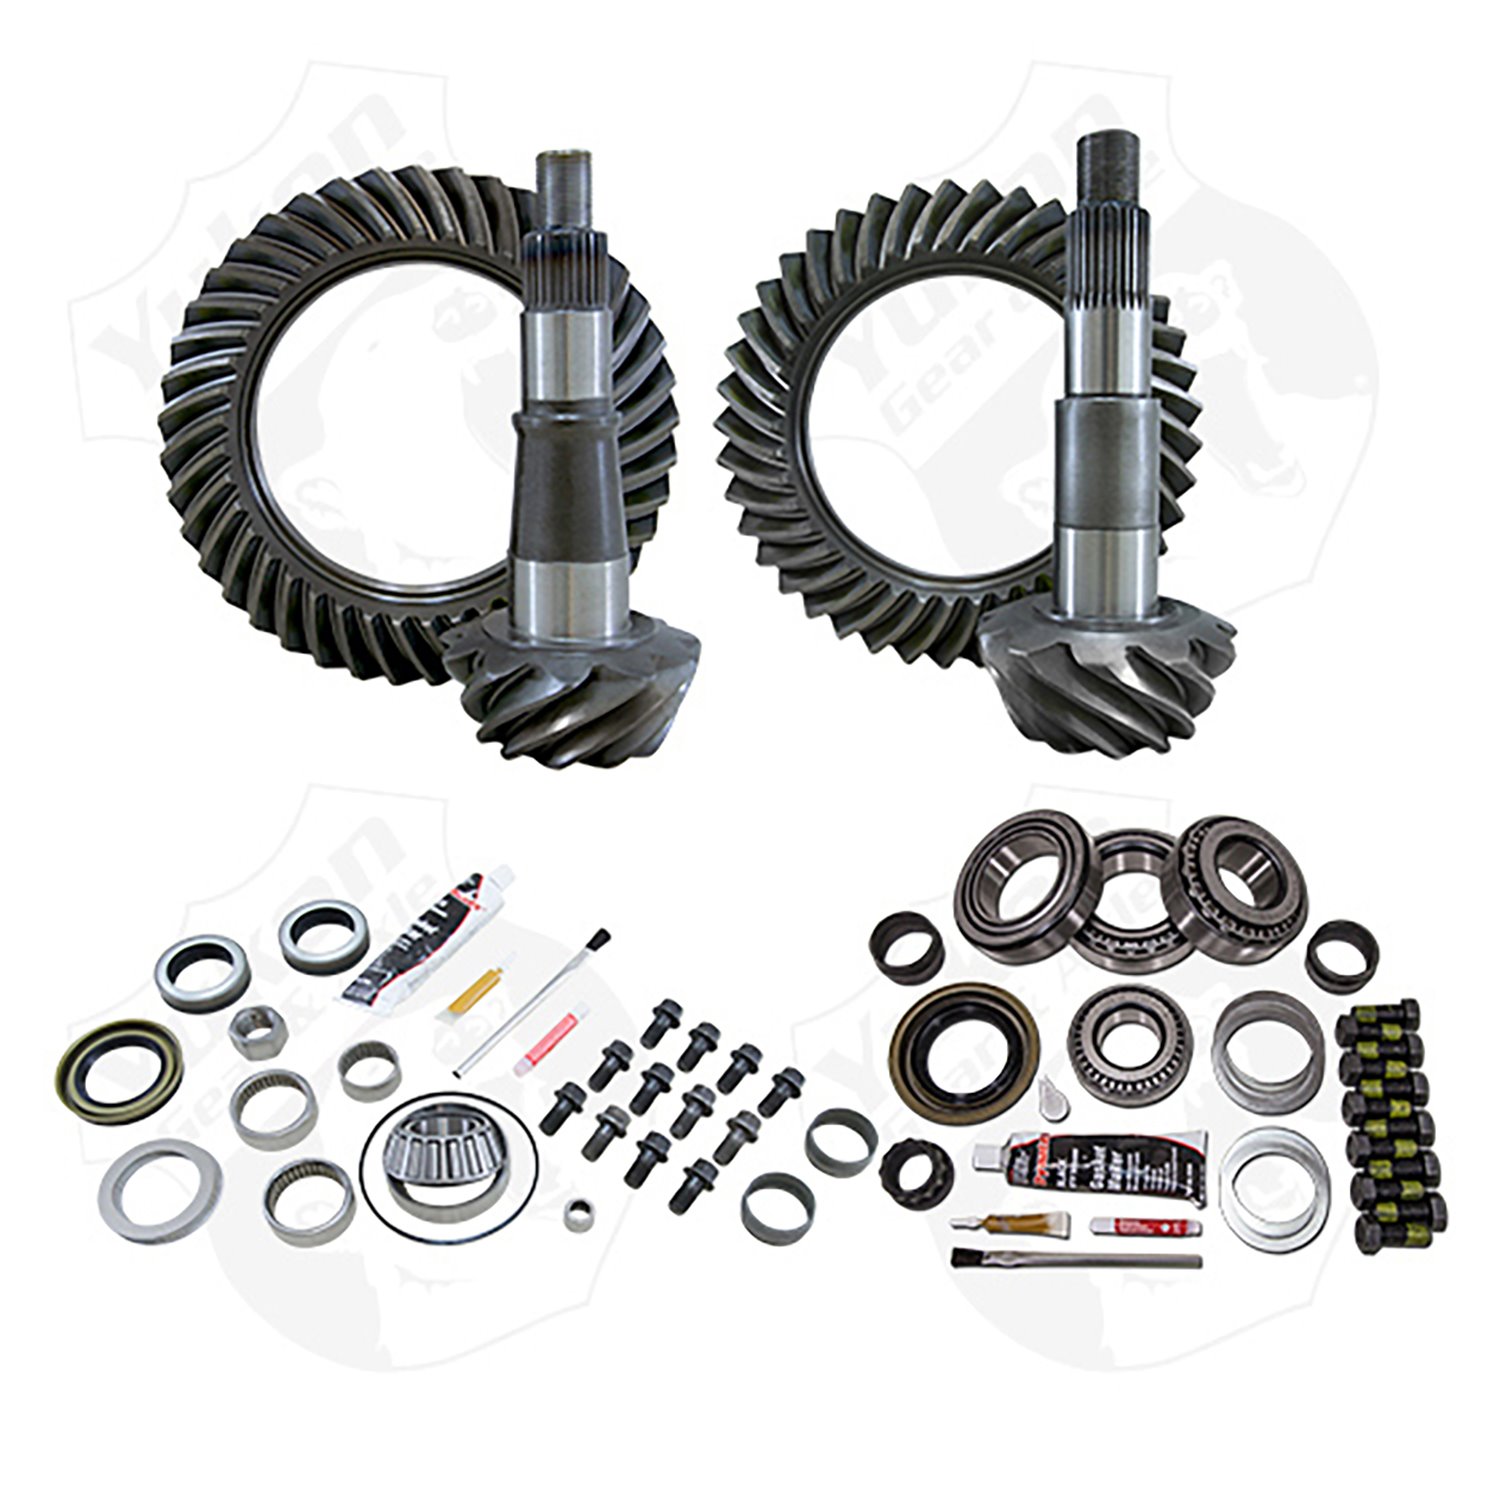 Gear & Install Kit Package For 2011-2013 Ram 2500 And 3500, 3.73 Ratio